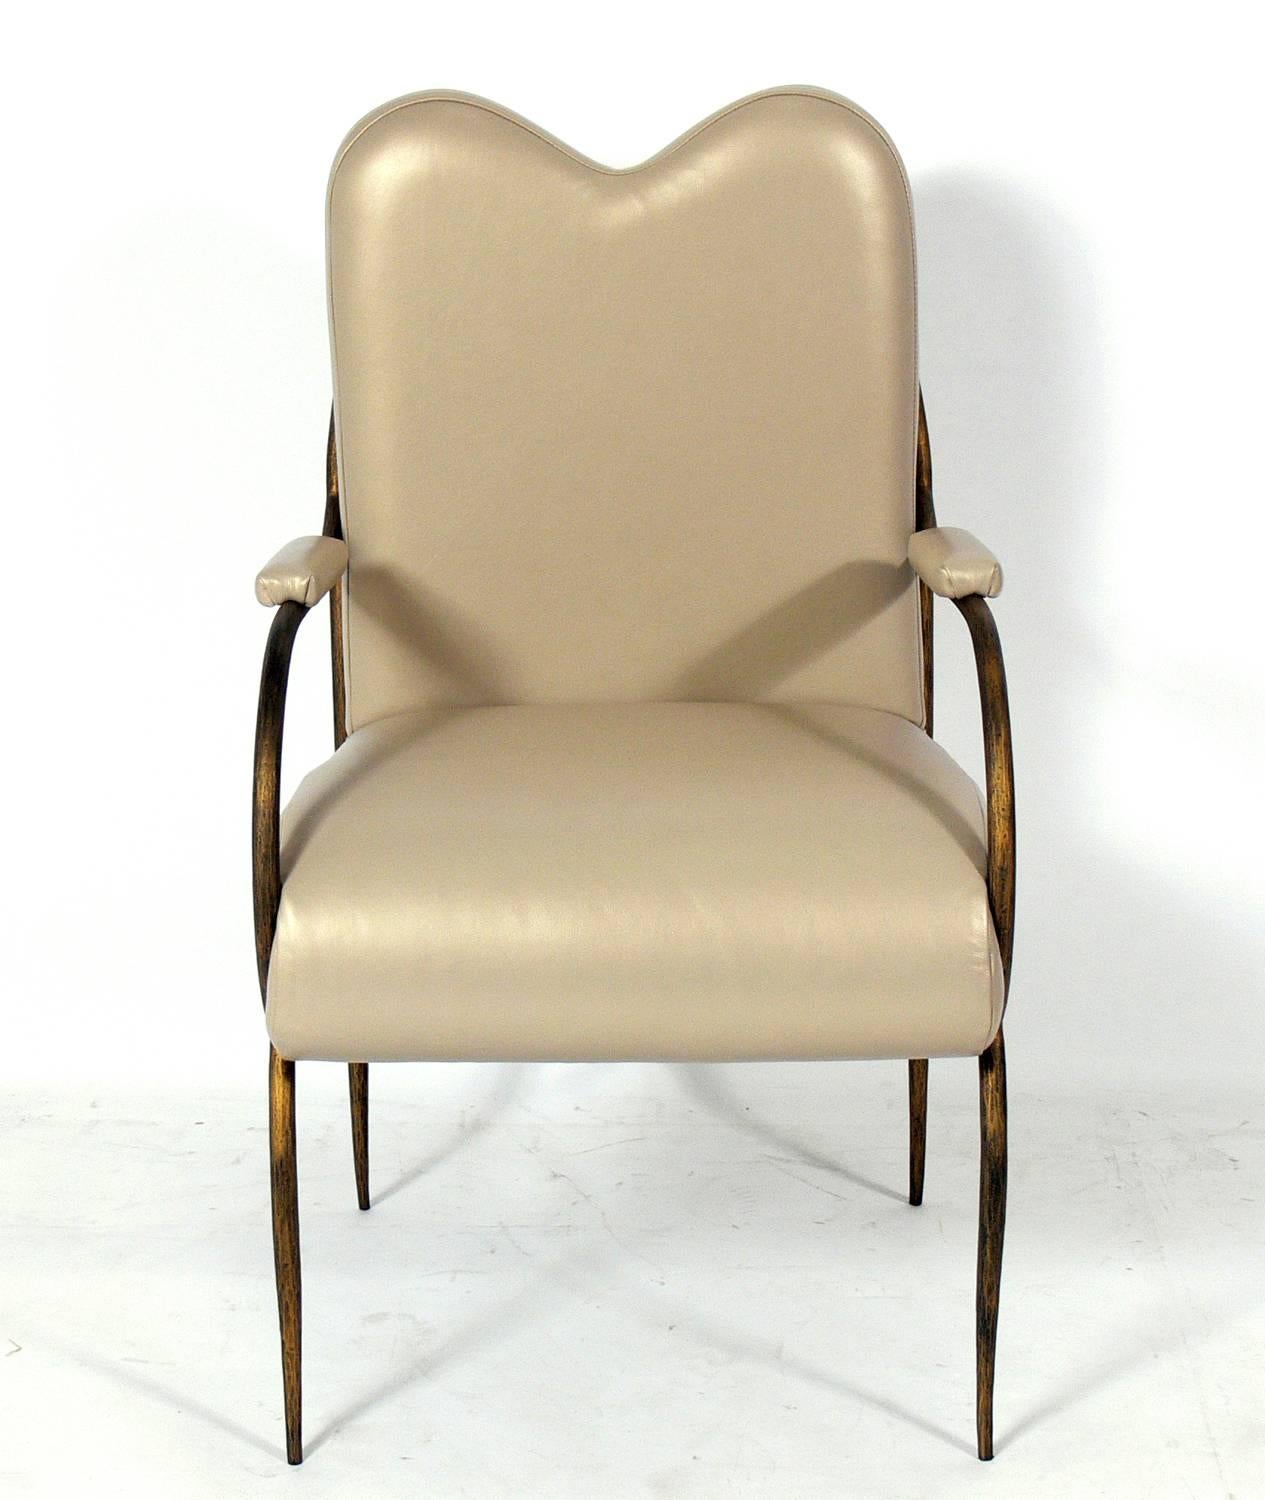 Hollywood Regency Gilt Iron and Leather Chair after René Drouet